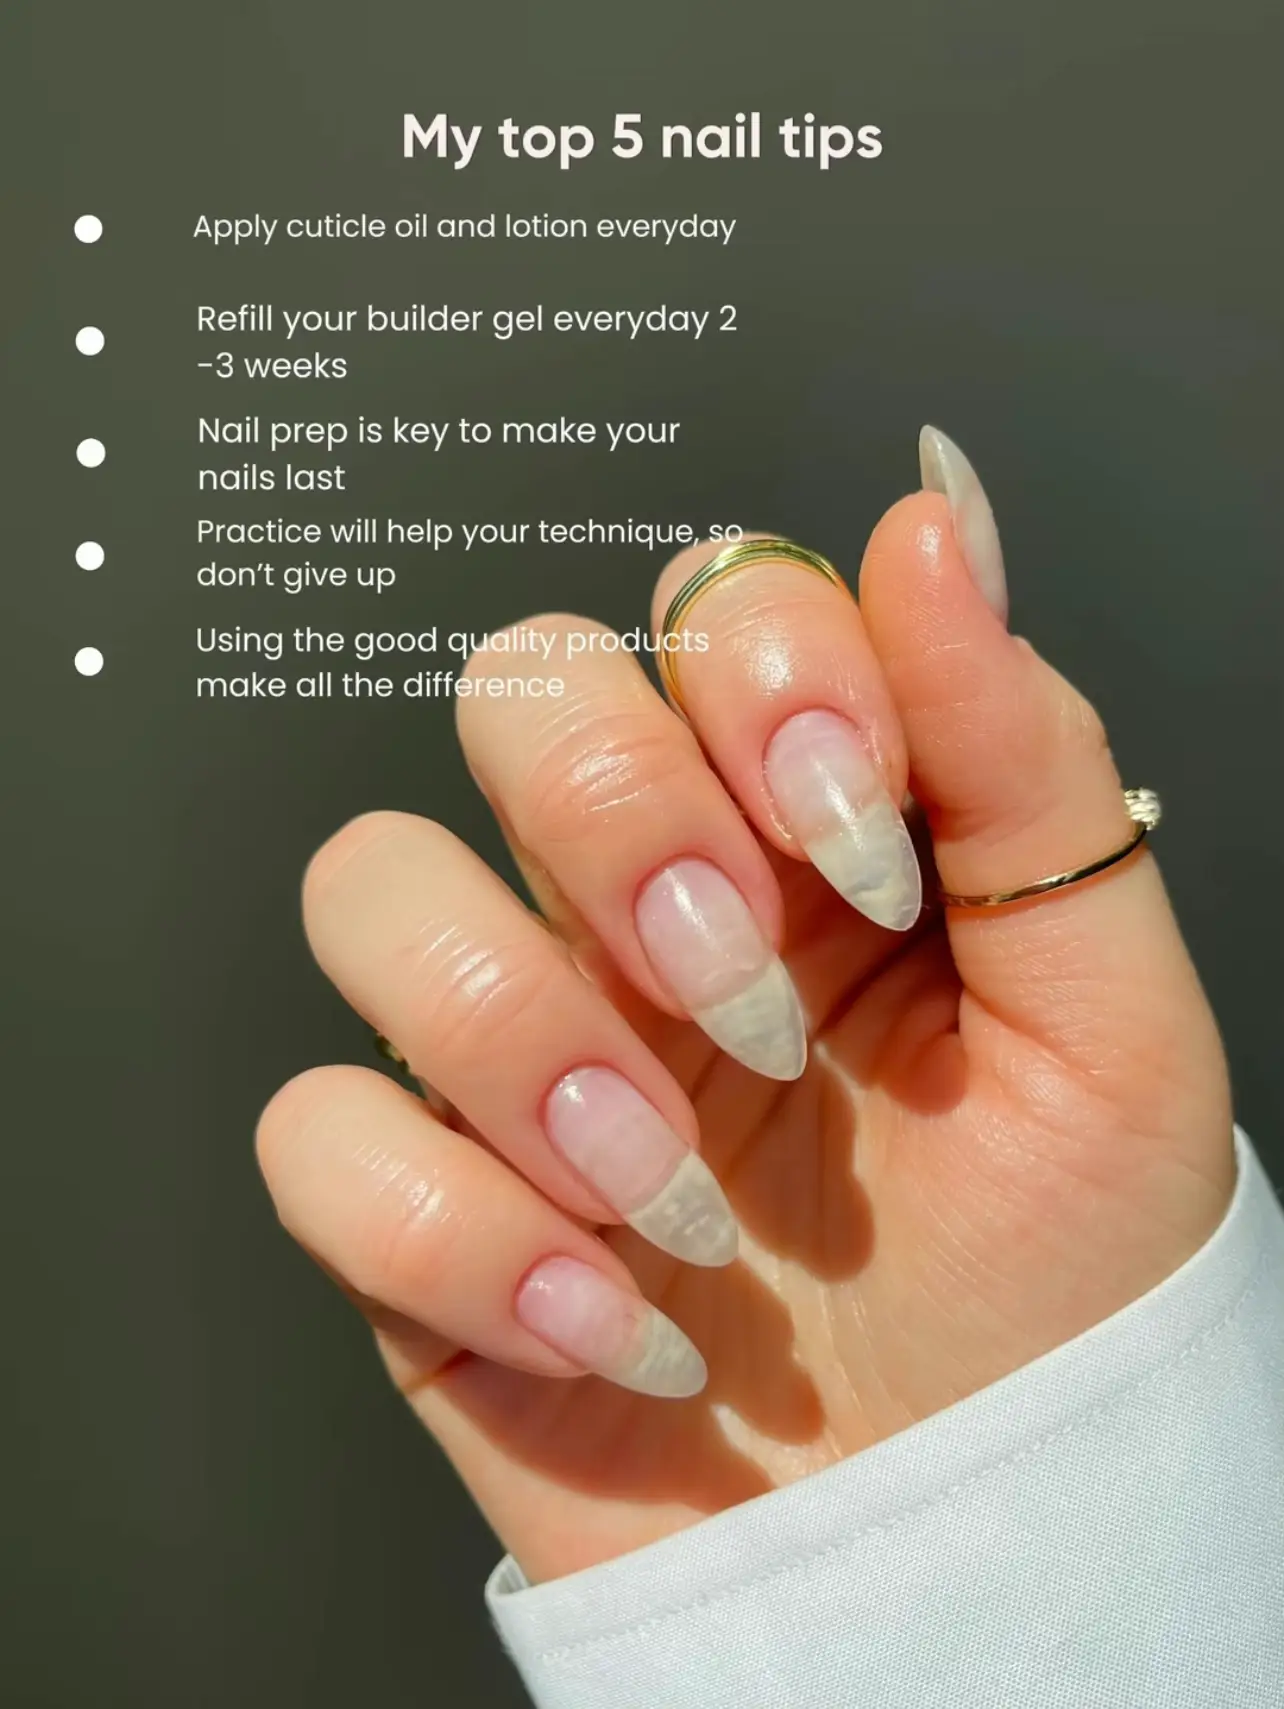 Nails Care Tips: 10 natural remedies for beautiful nails - Times of India